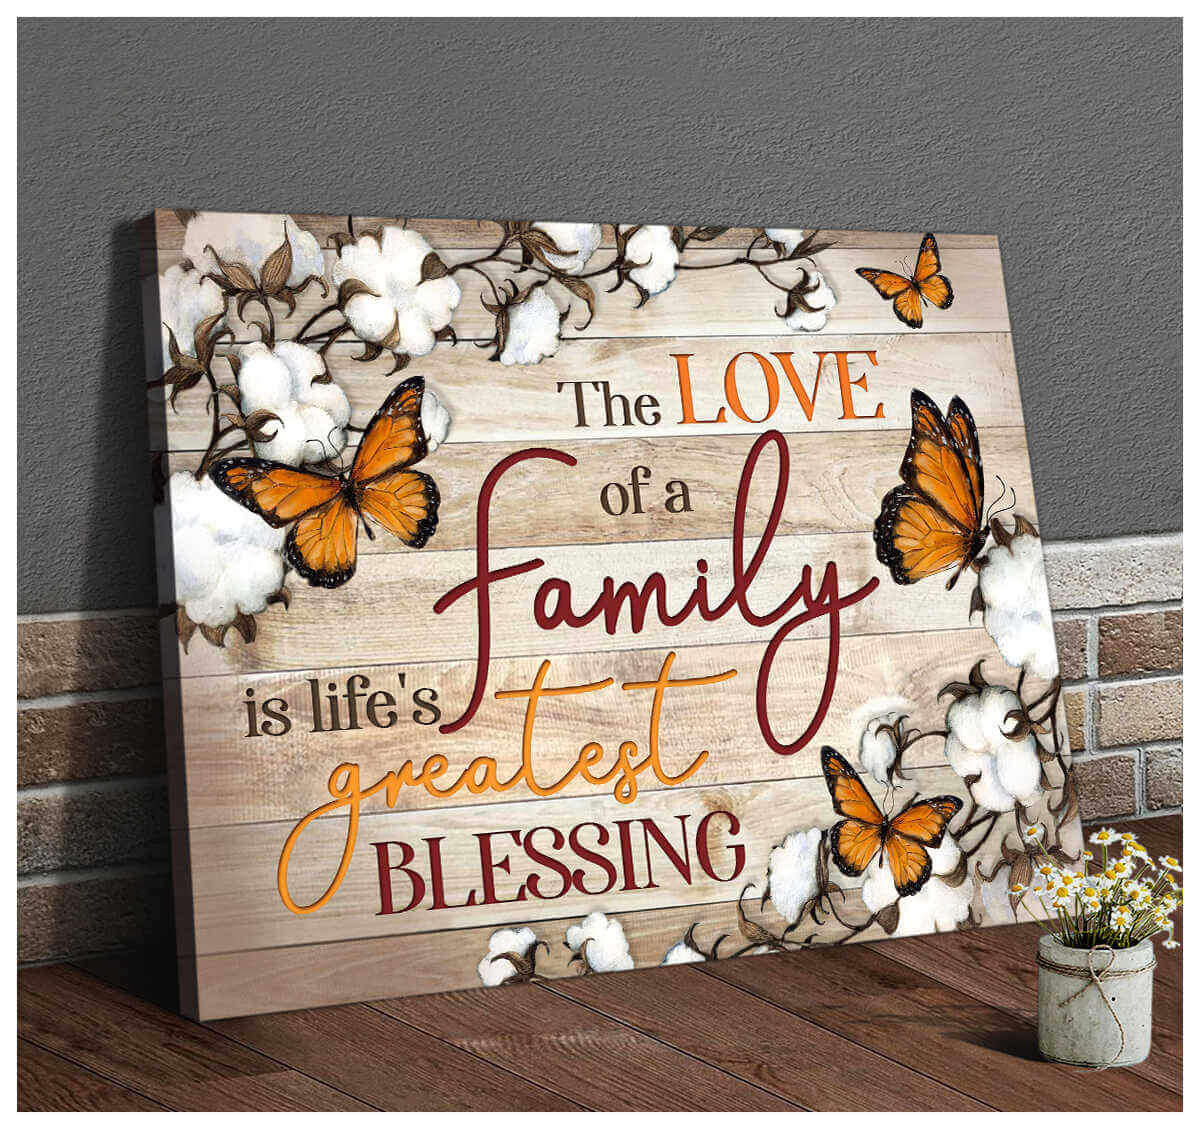 Cotton Flowers and Butterflies Canvas The love of a Family Wall Art Decor